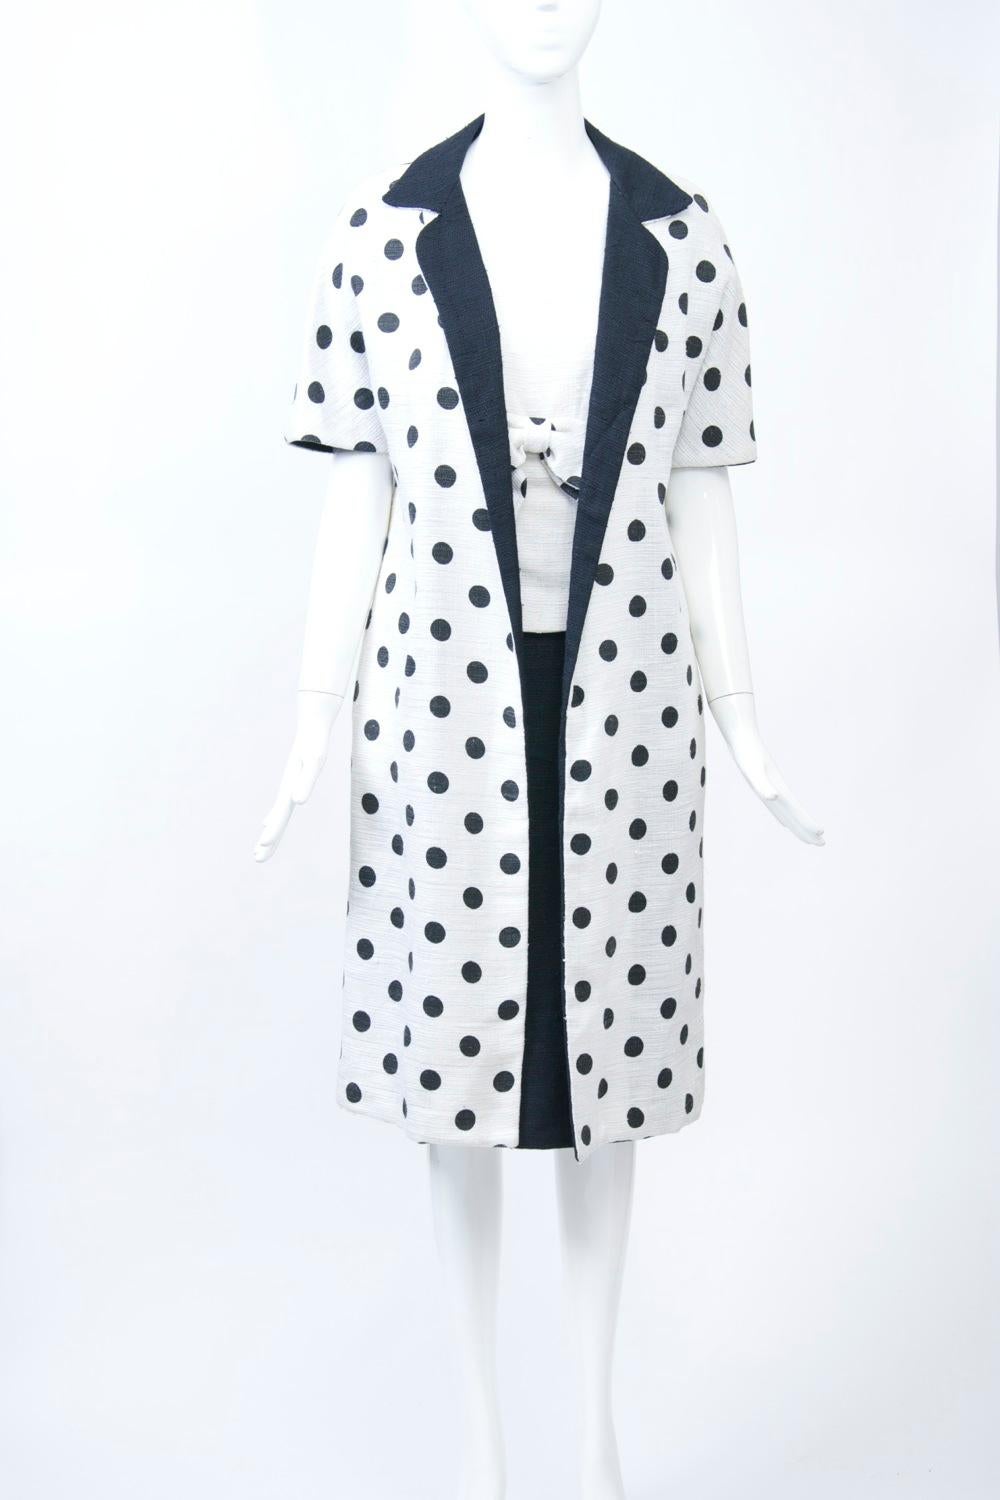 1960s summer weight dress and coat ensemble in linen-blend fabric, the short-sleeve, open coat in white with black polka dots throughout; its black lining provides the collar and facing. Underneath is a one-piece sleeveless dress that's styled as a